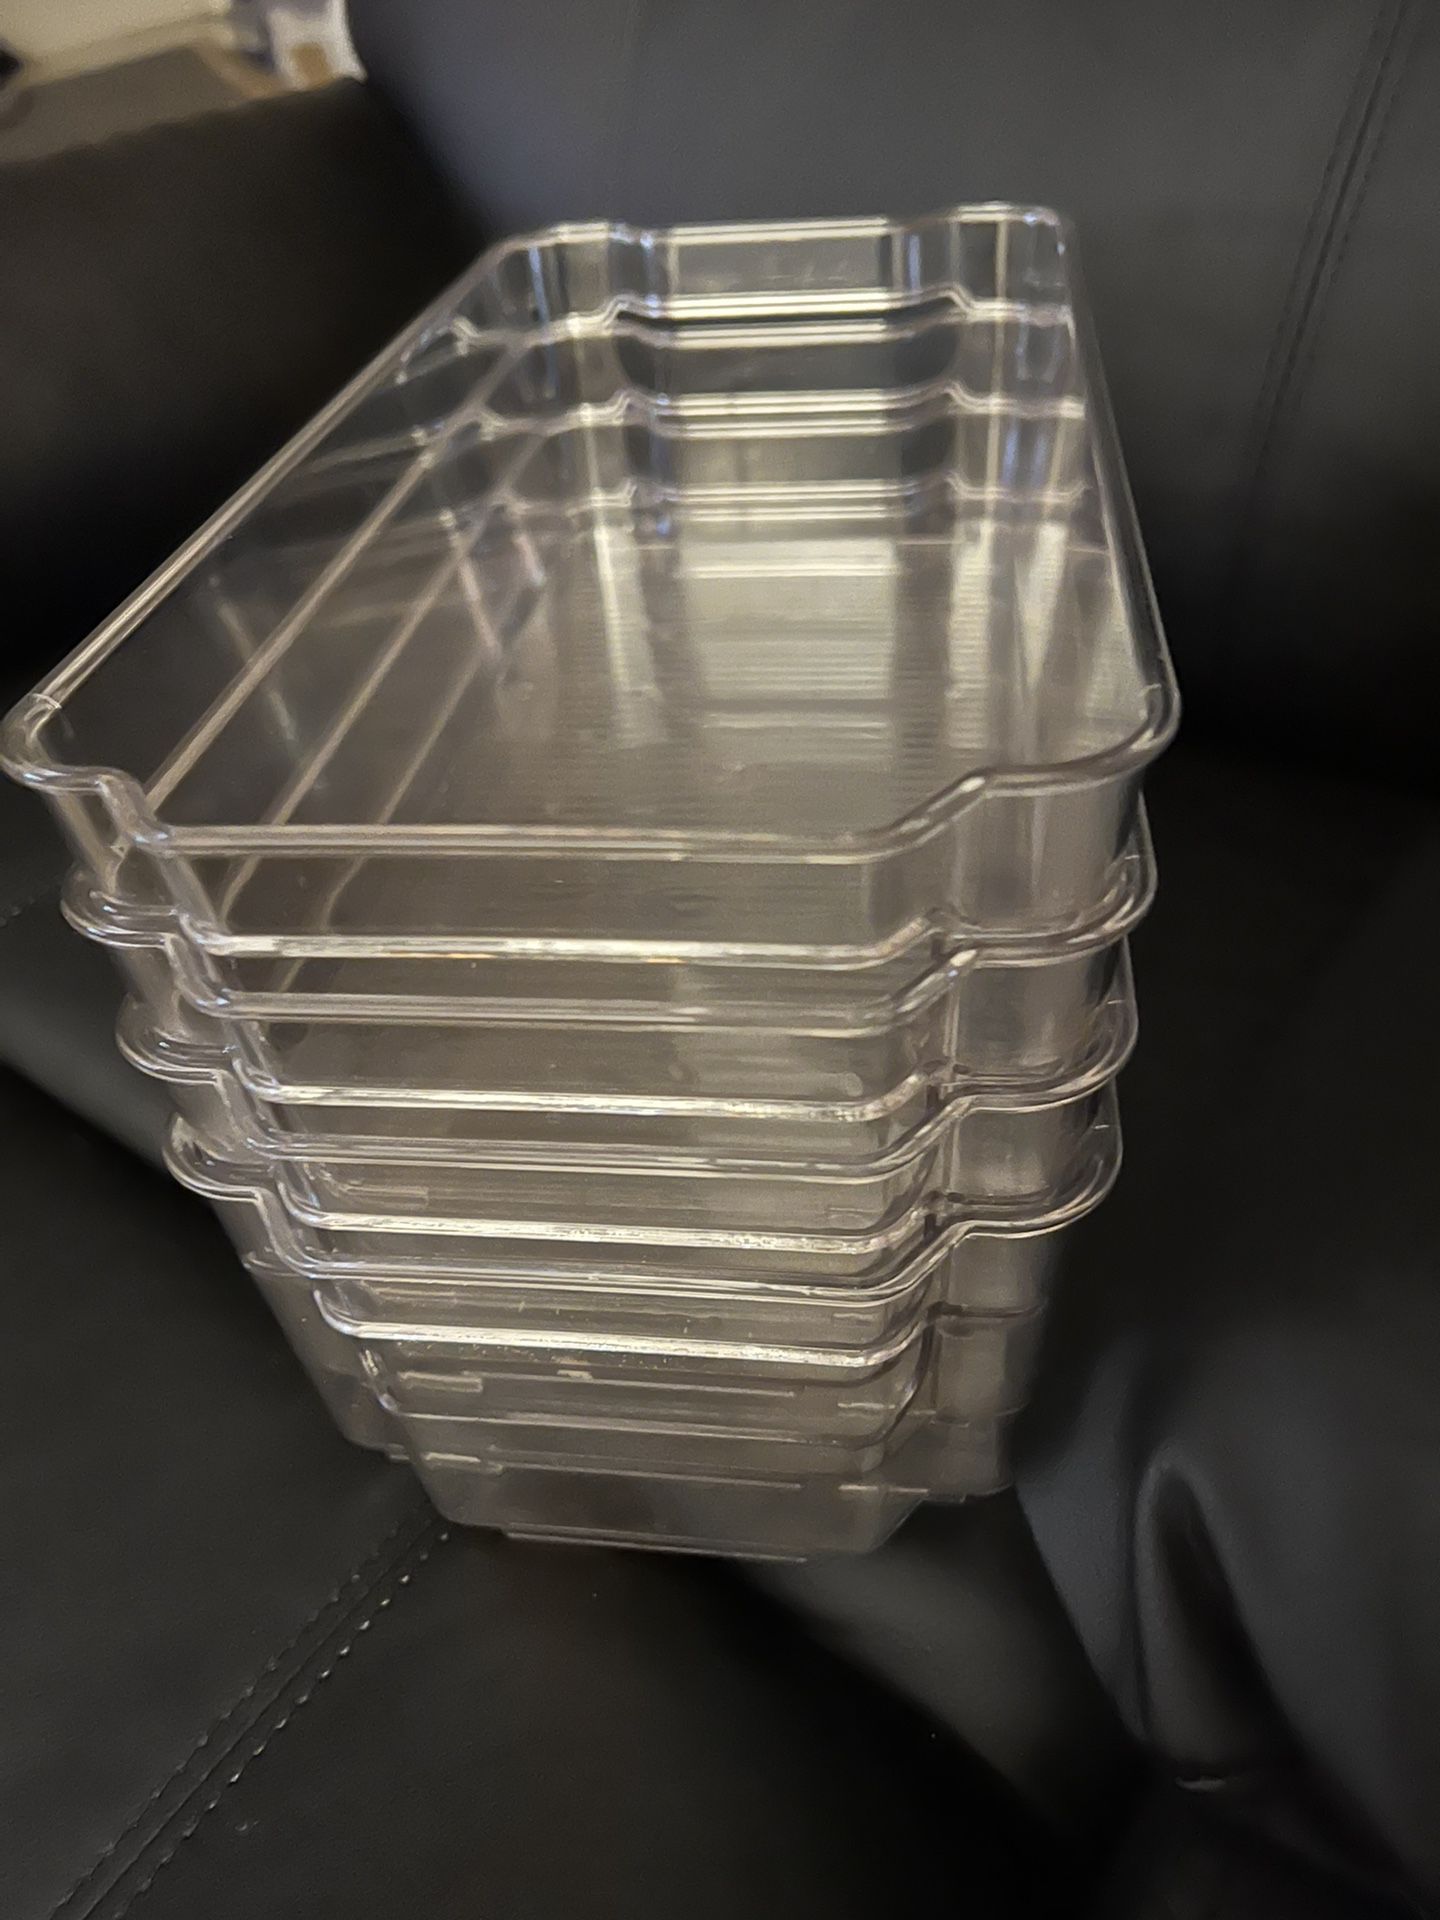 Brand New~ 4 PACK Clear Water Bottle Dispenser Organizer Bins for  Refrigerator - BPA-Free - Fridge Organizer for Drinks Soda Cans & Beer for  Sale in Hacienda Heights, CA - OfferUp